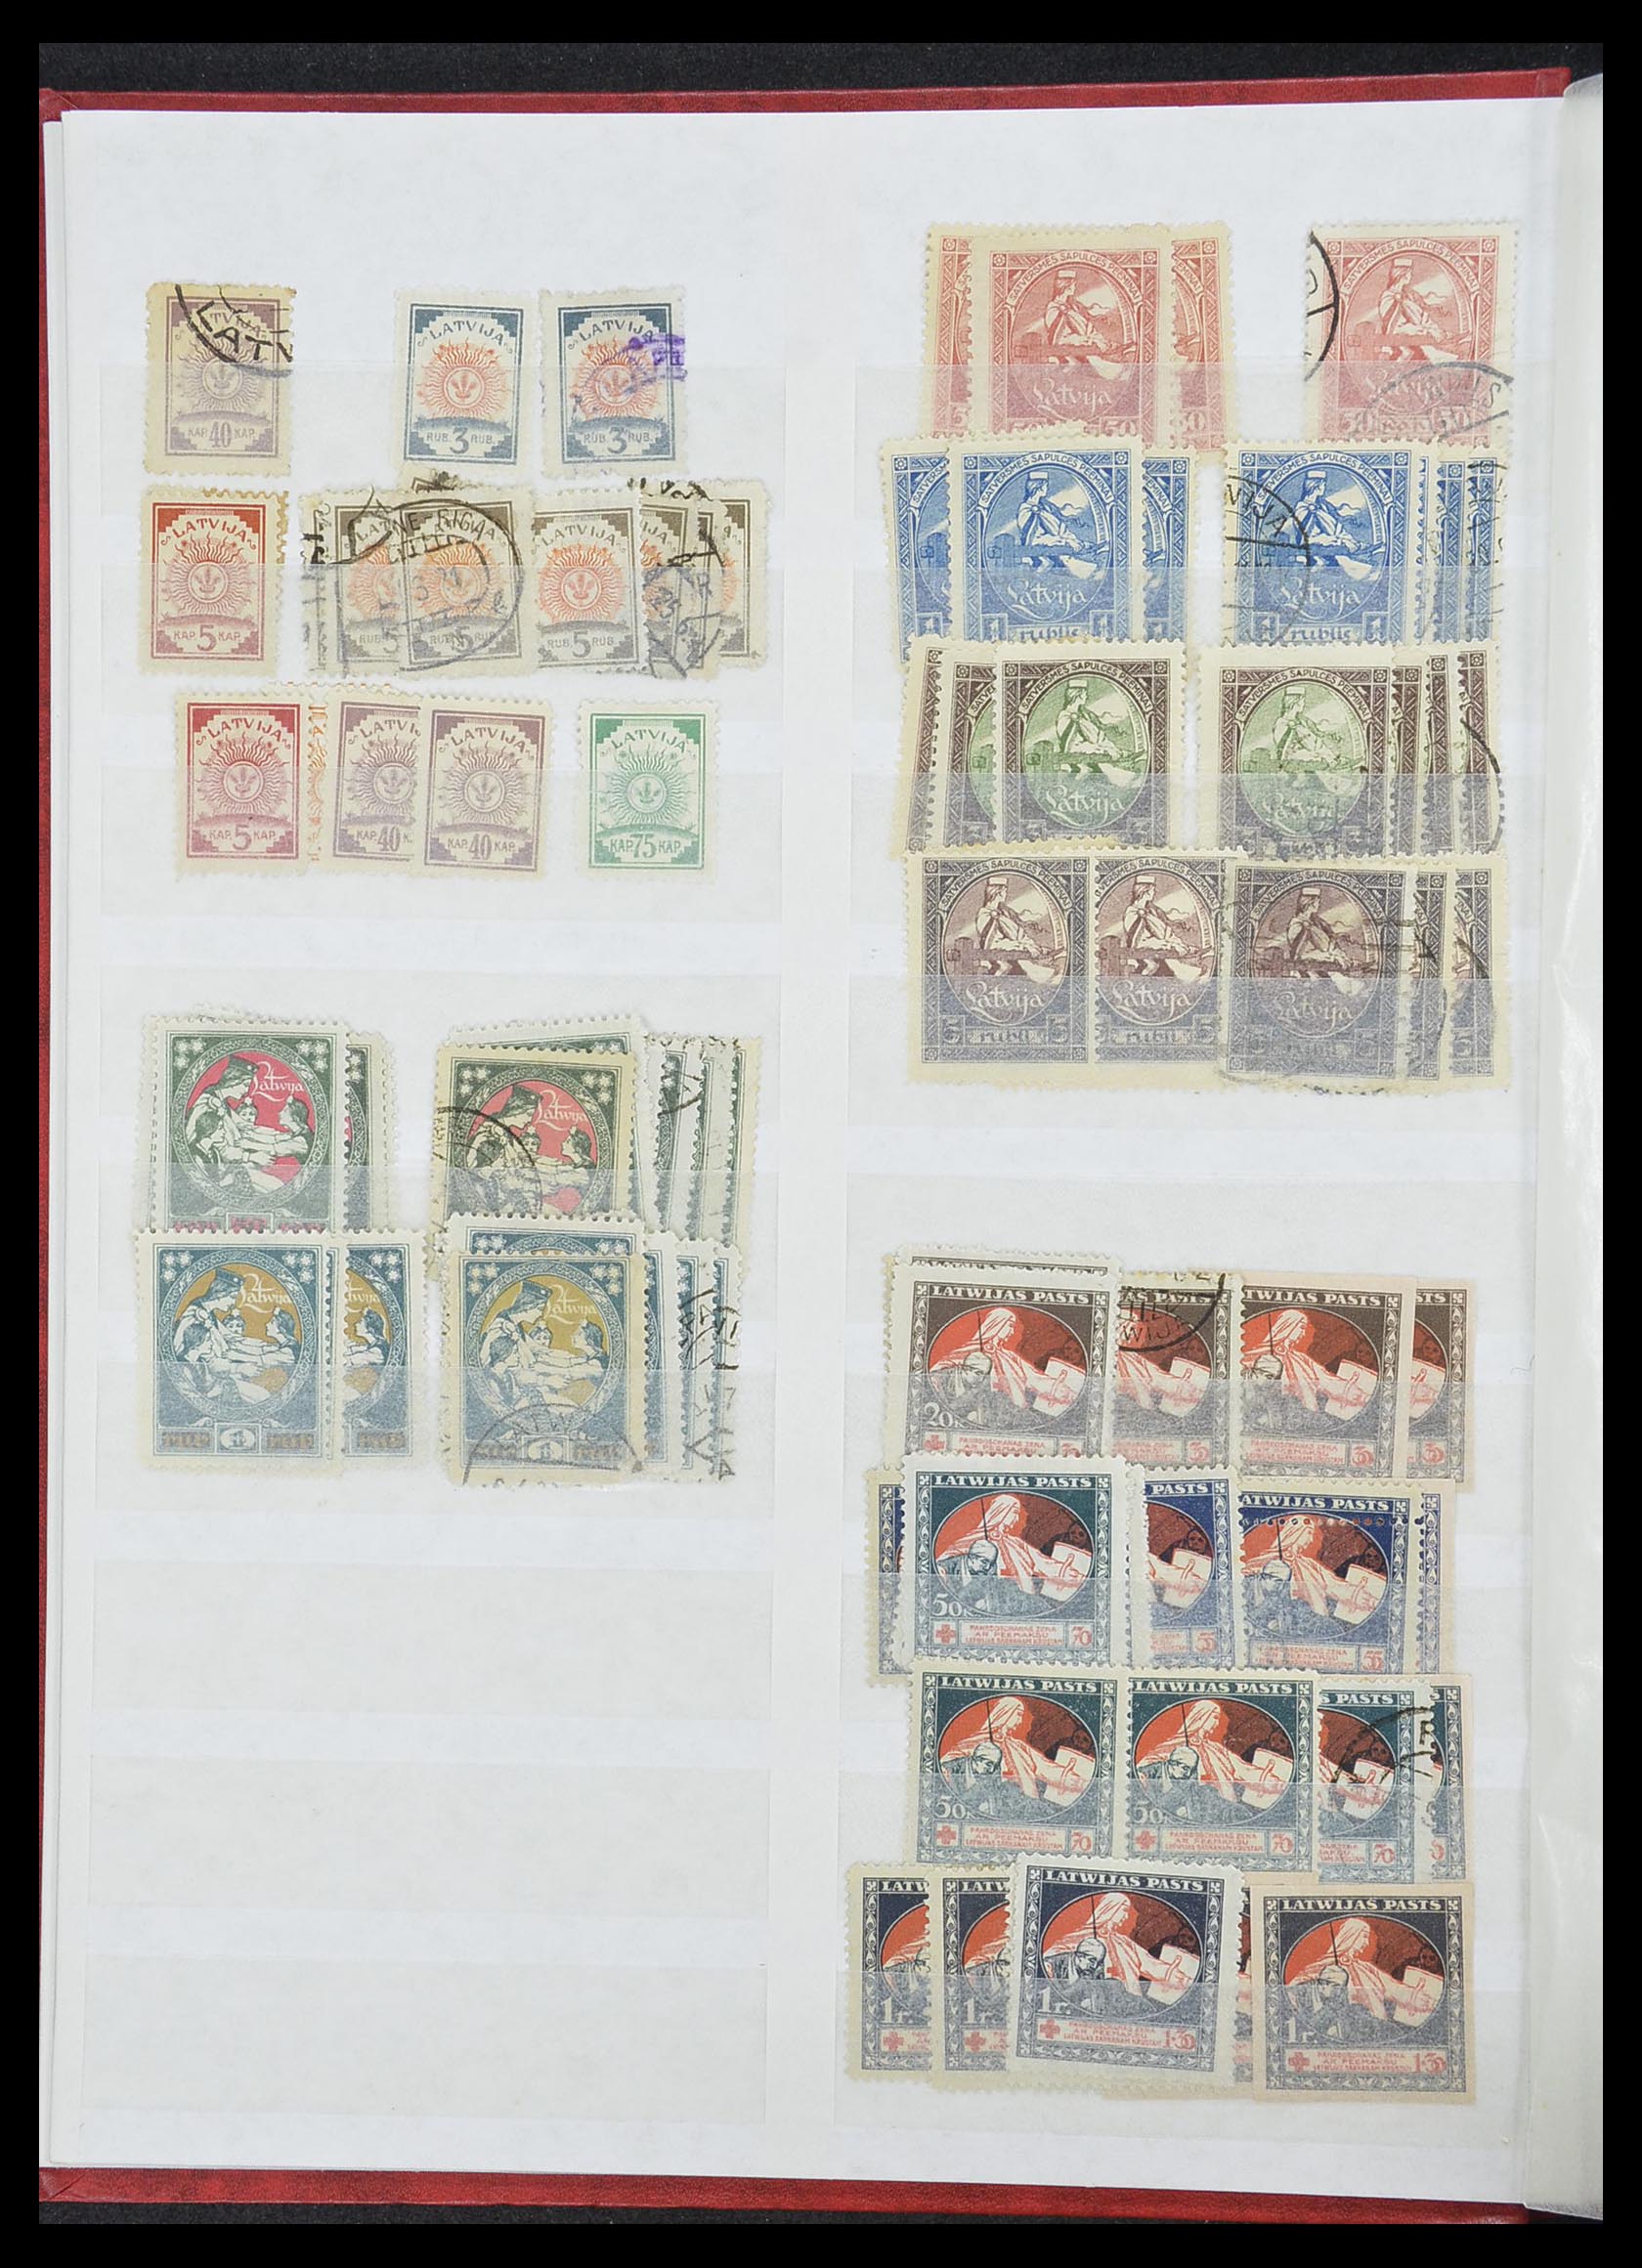 33843 017 - Stamp collection 33843 Estonia and Latvia 1918-1940.